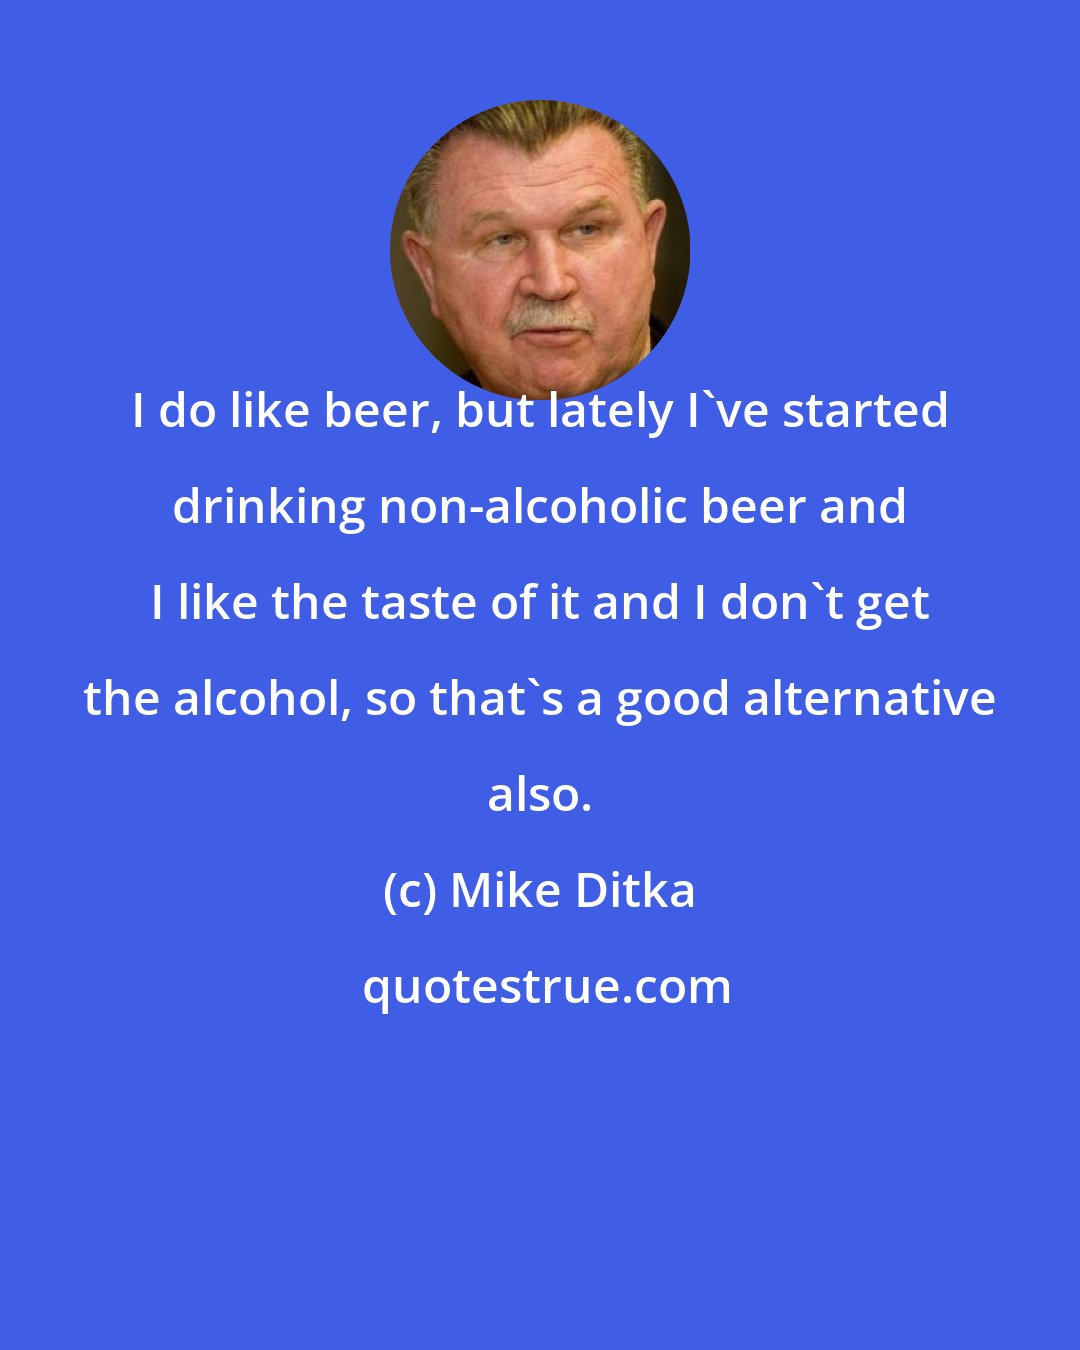 Mike Ditka: I do like beer, but lately I've started drinking non-alcoholic beer and I like the taste of it and I don't get the alcohol, so that's a good alternative also.